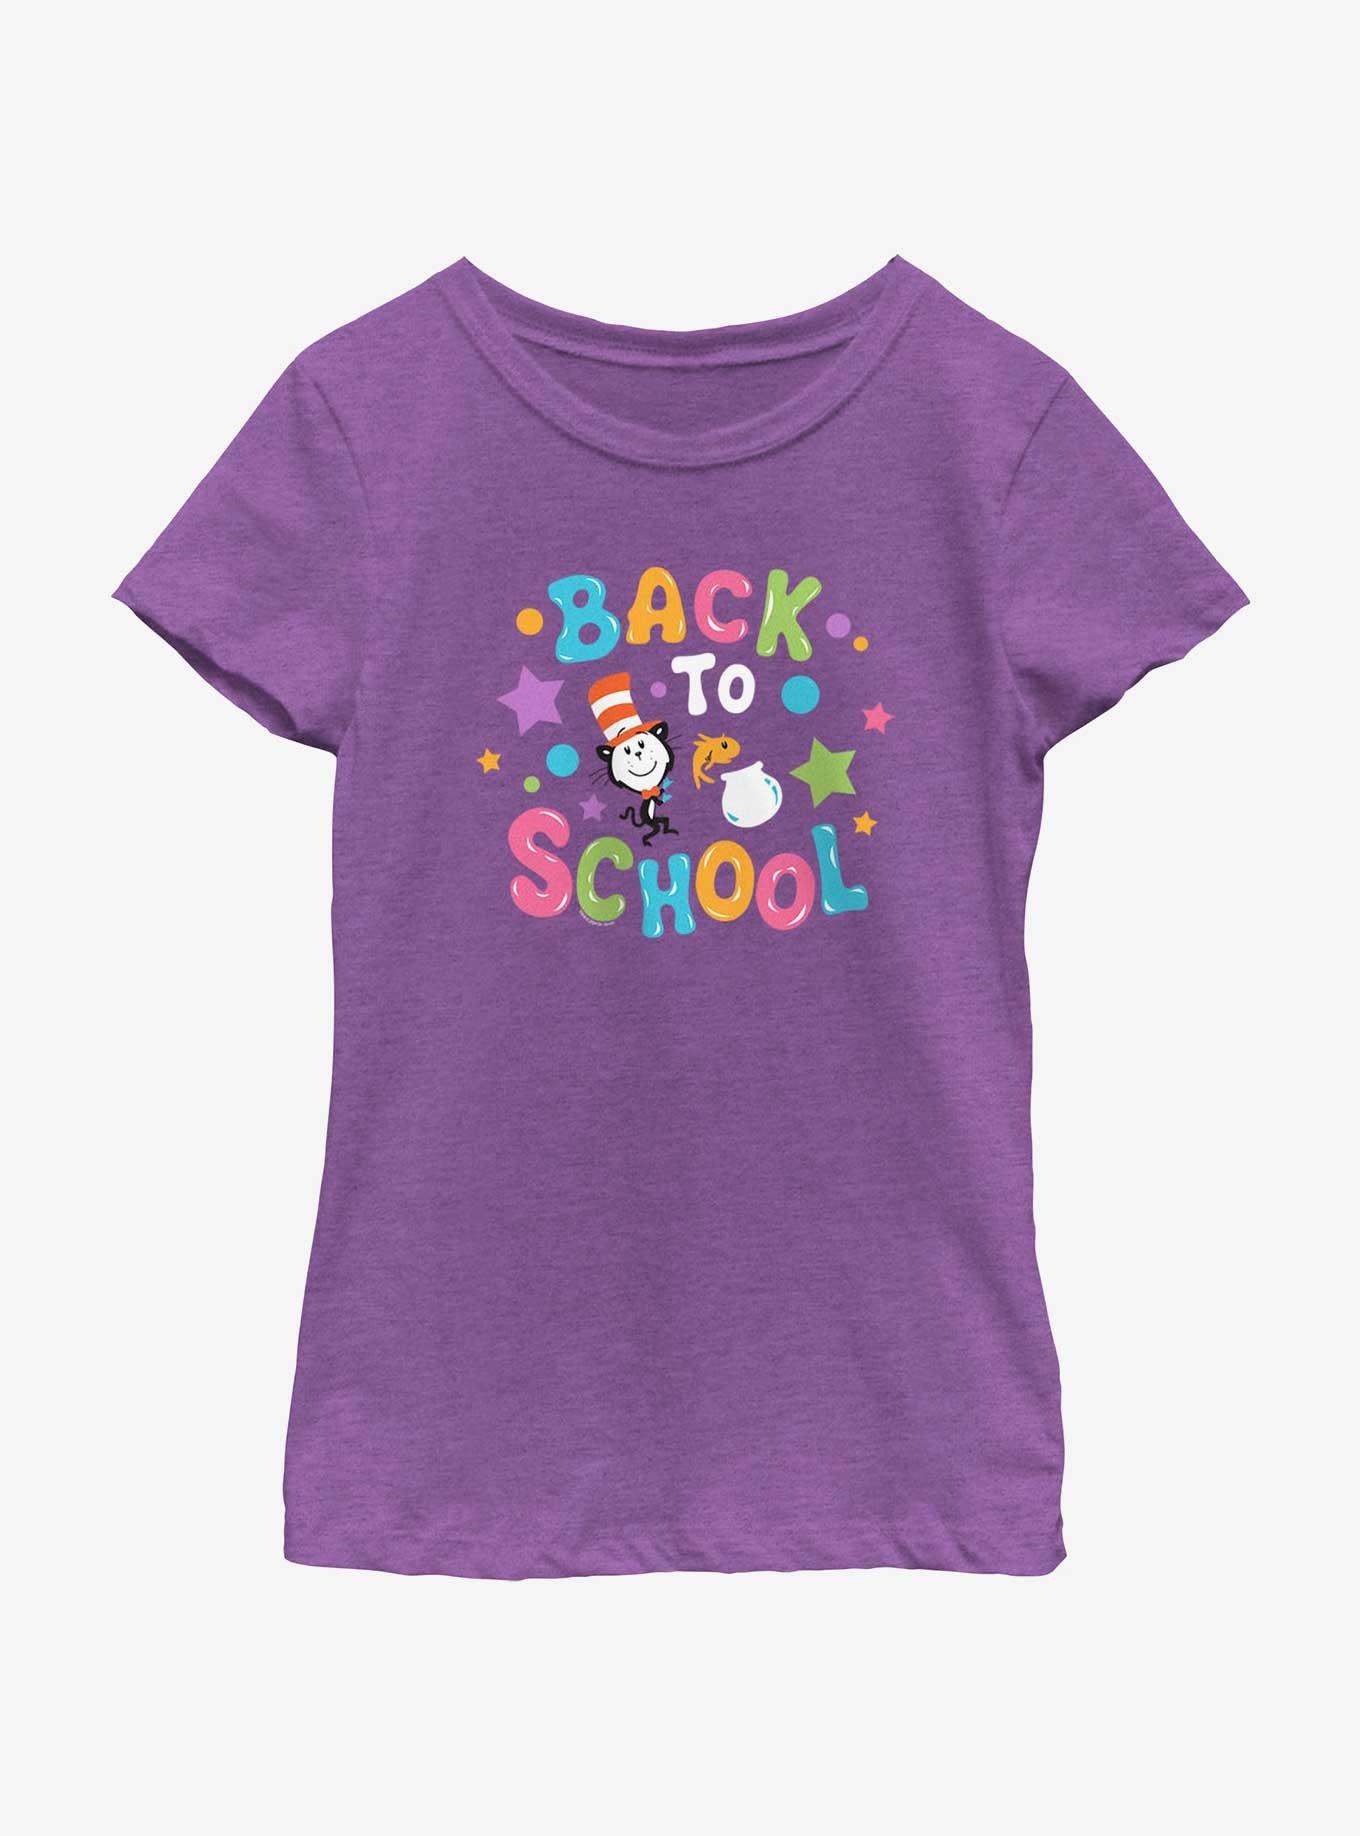 Dr. Seuss School Thing One Youth Girls T-Shirt, PURPLE BERRY, hi-res